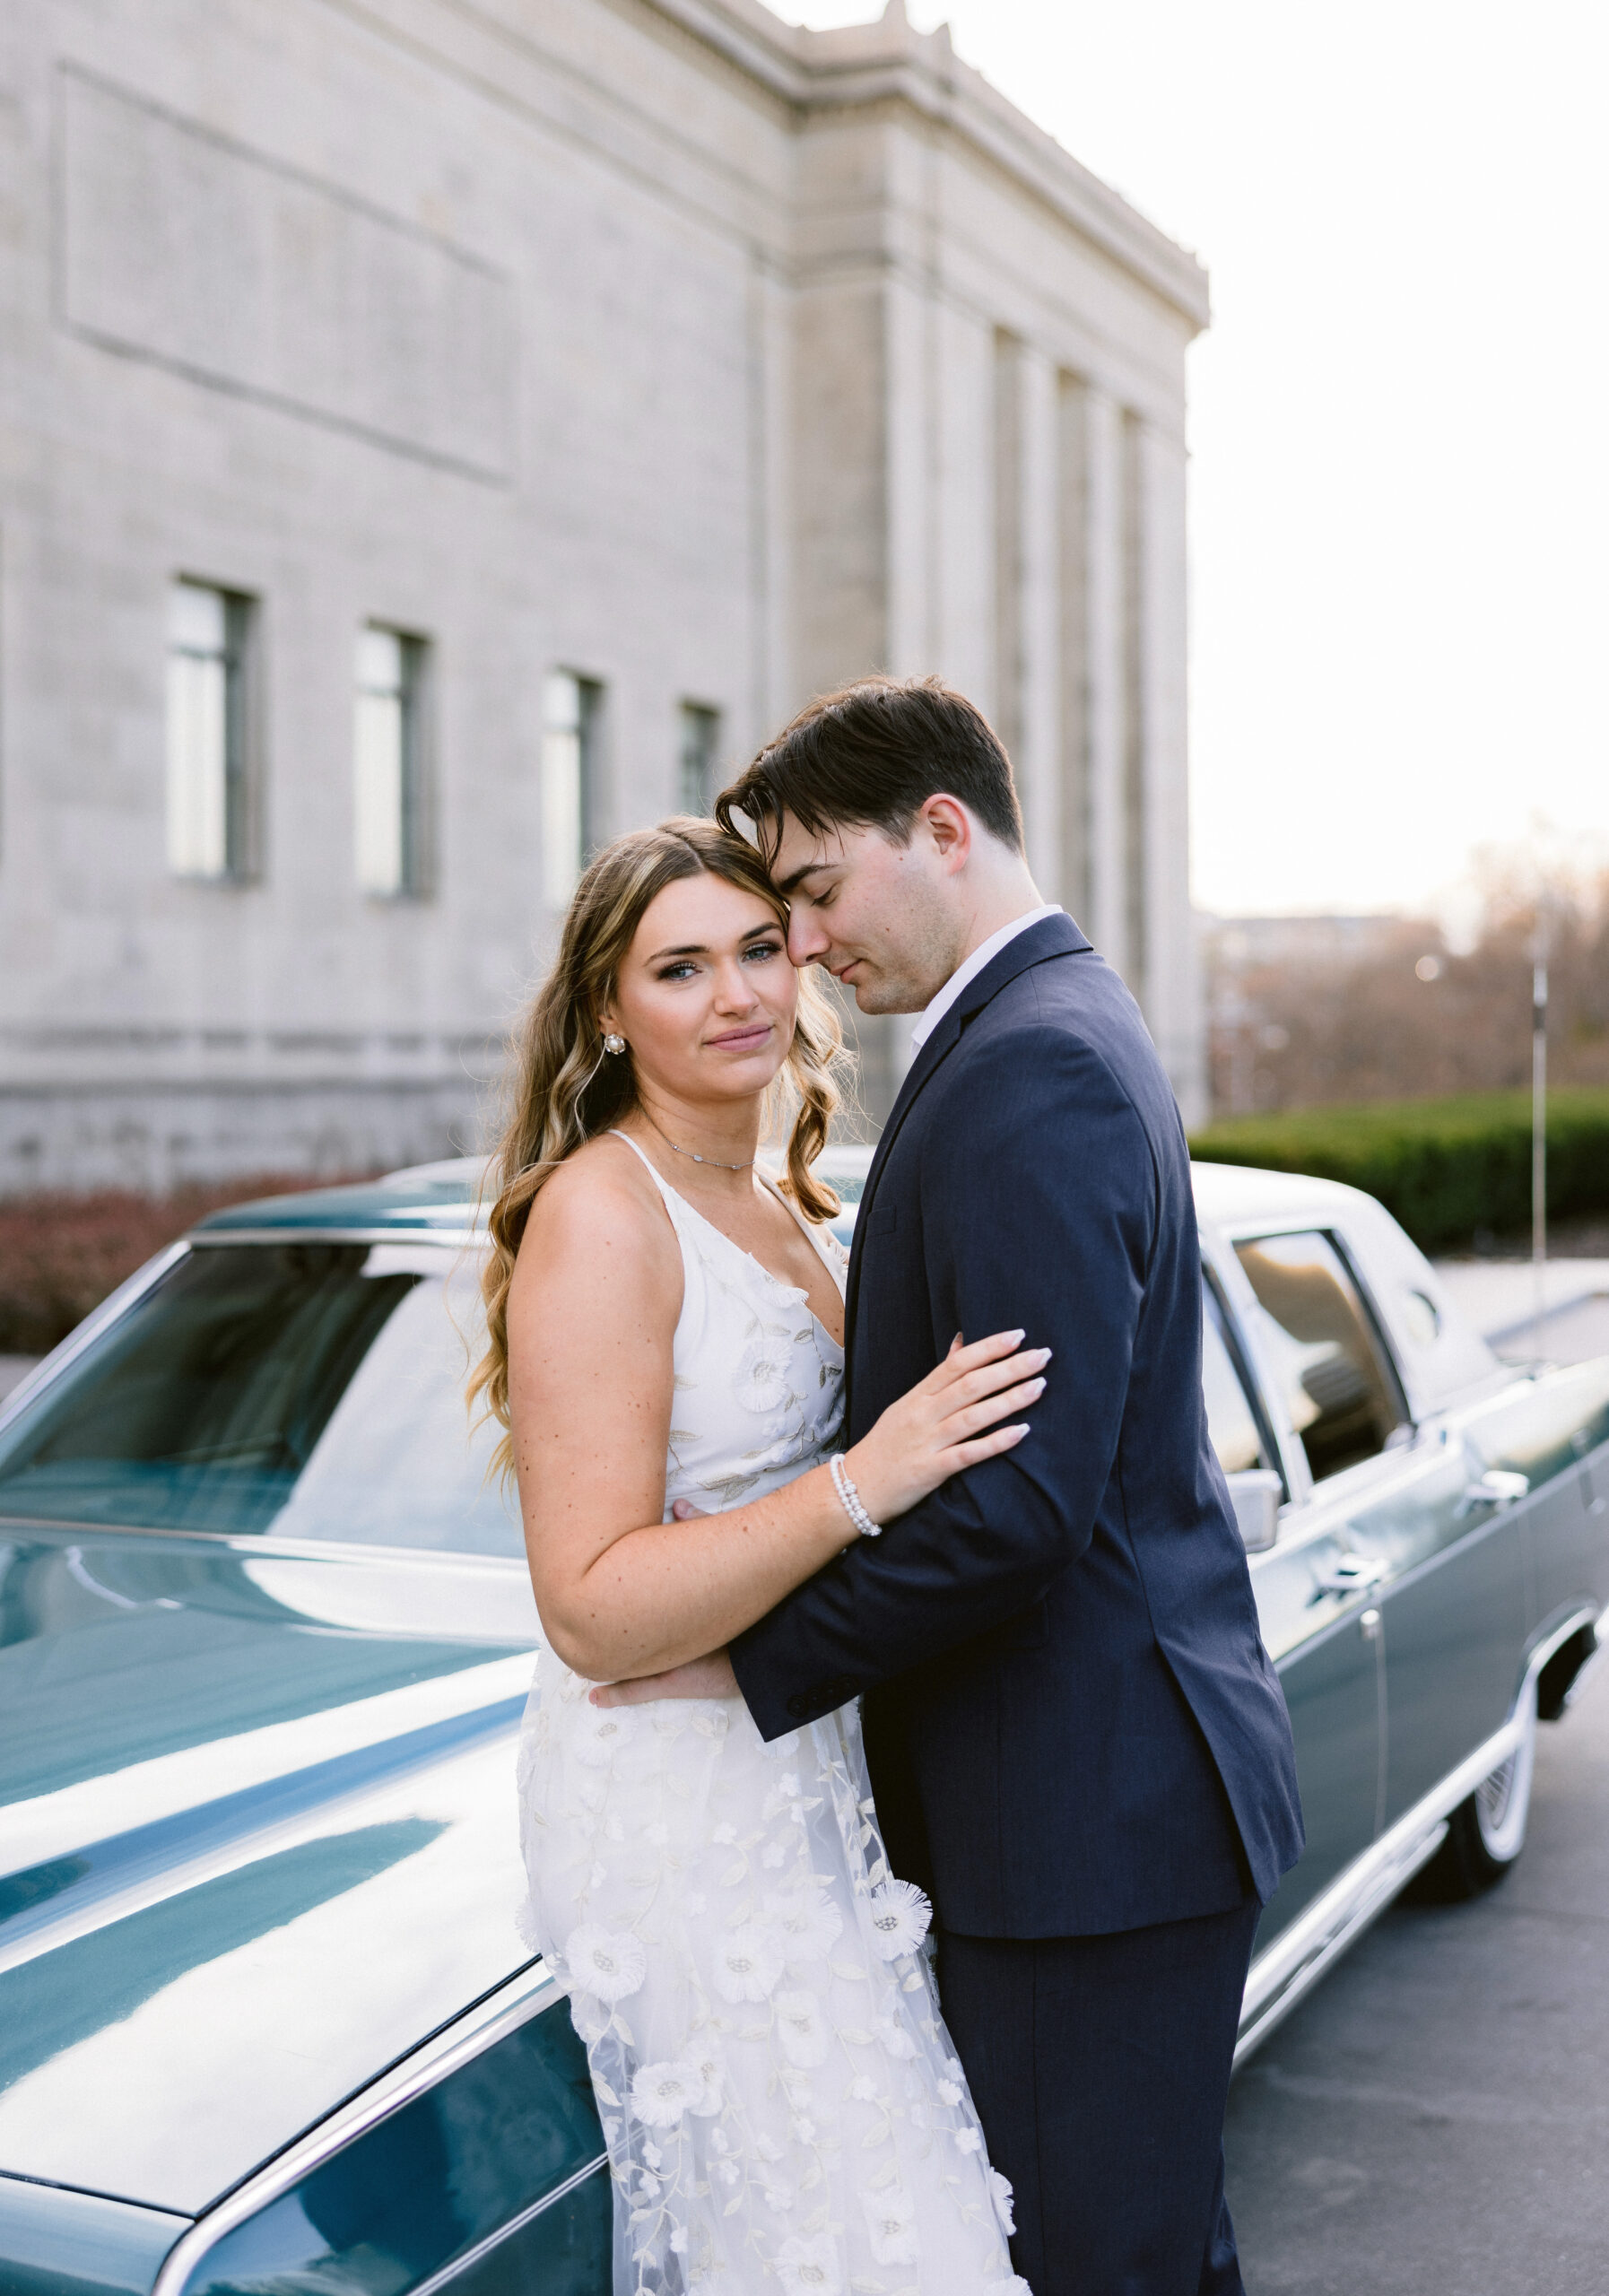 wedding couple in Kansas City, Missouri leaning into each other next to a vintage car by Tatyana Zadorin Photography closeup photoshoot